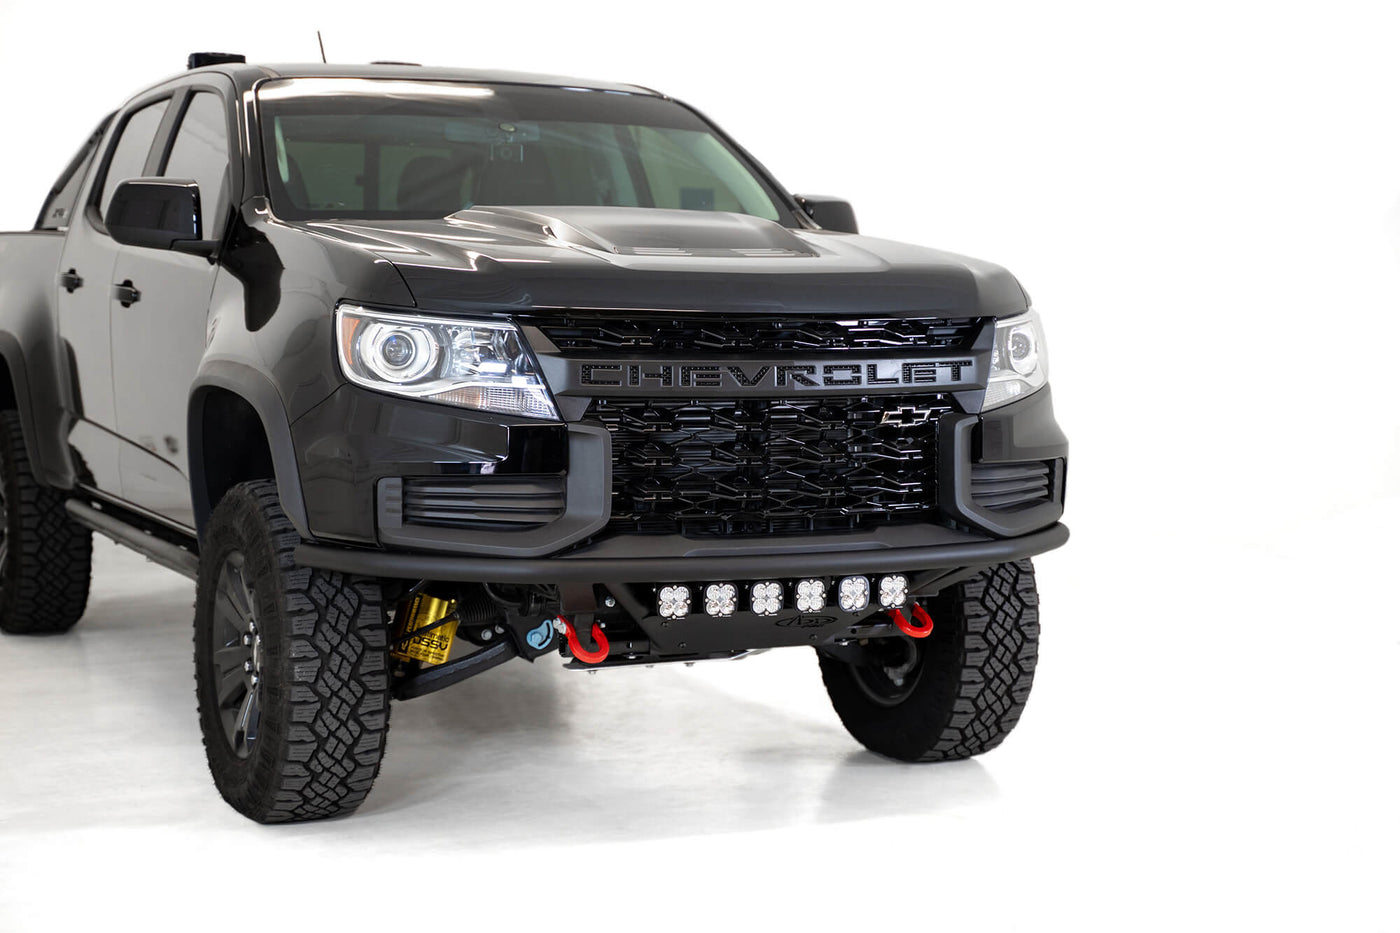 2021 - 2022 Chevy Colorado ZR2 ADD PRO Bolt-on Front Bumper | Heritage